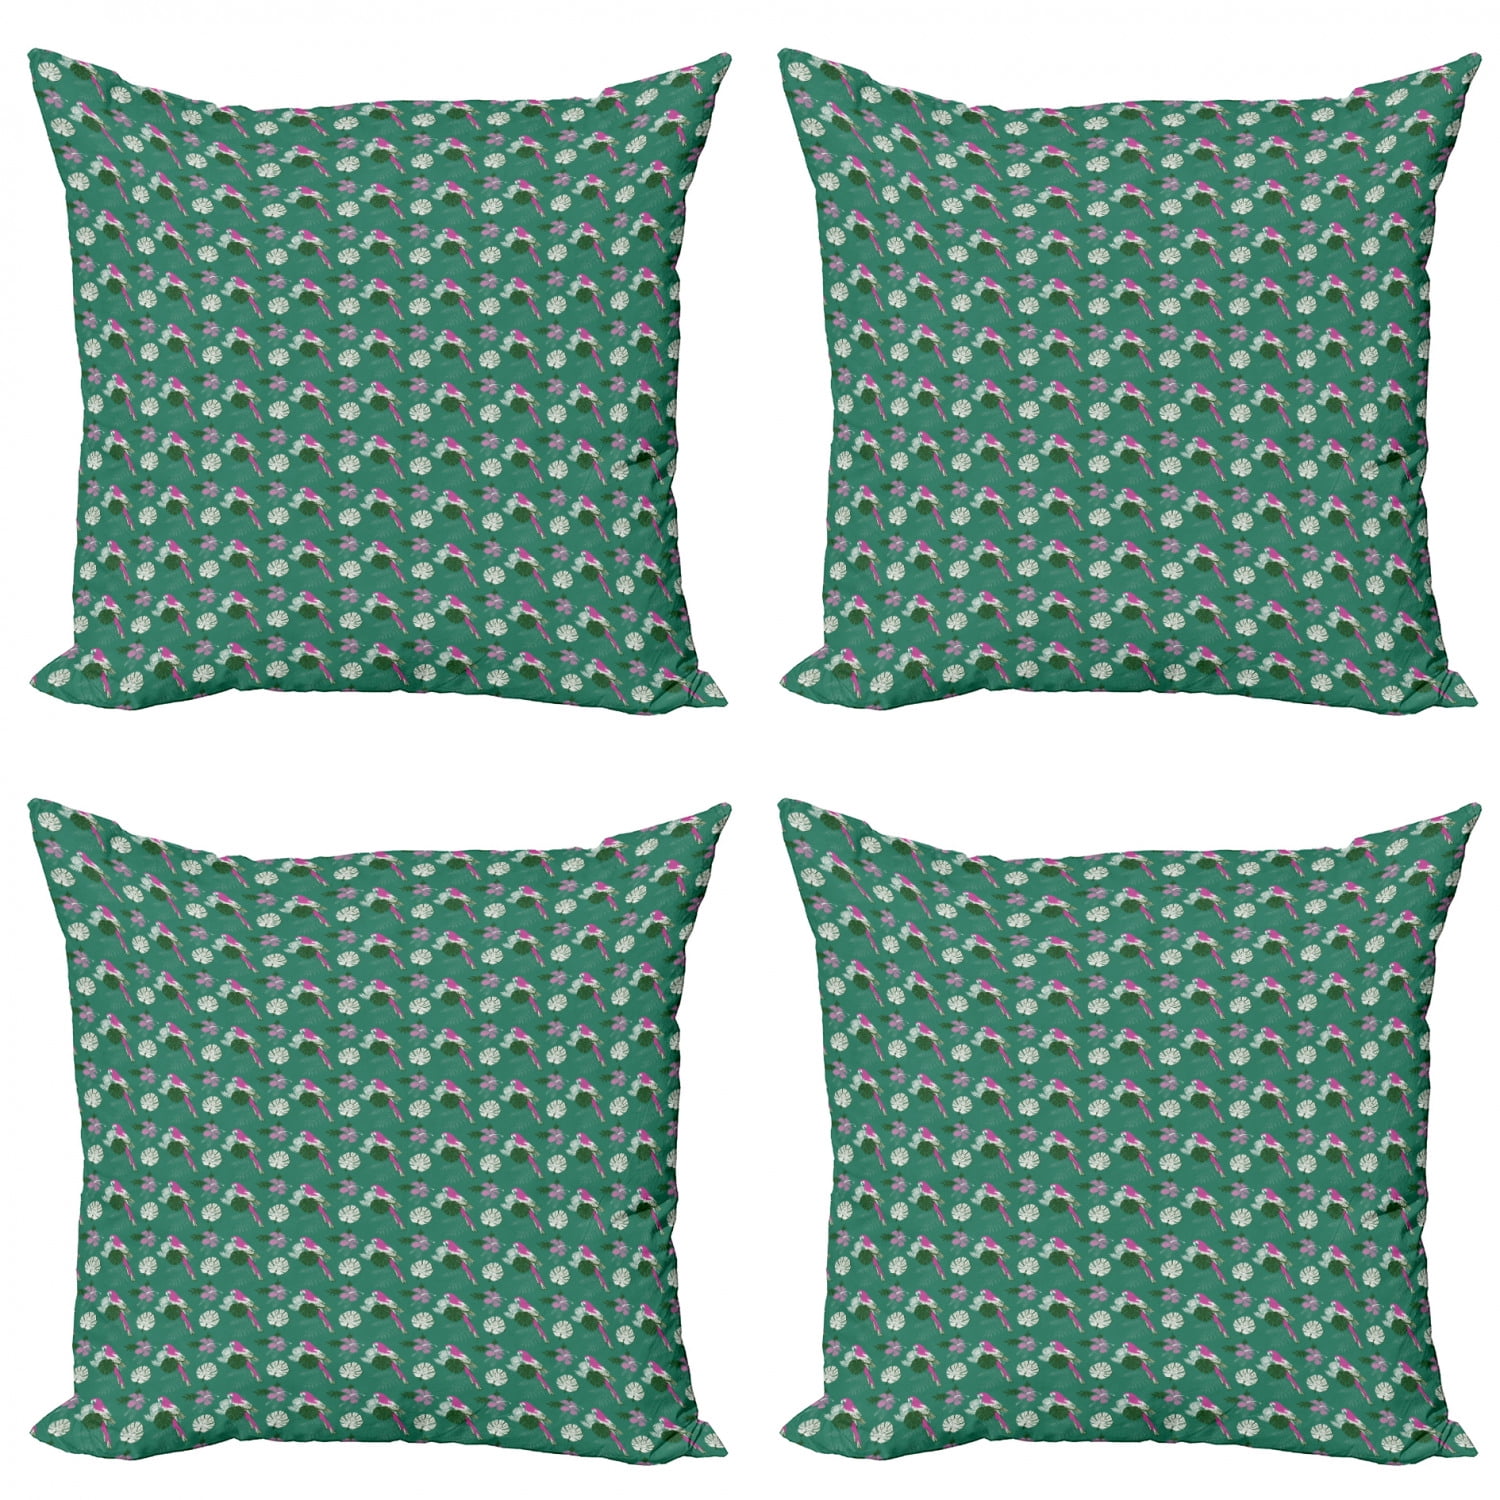 NEW 18" PLAIN JADE GREEN CUSHION COVER PILLOW BED SOFA MORE COLOURS SIZES AVAIL 